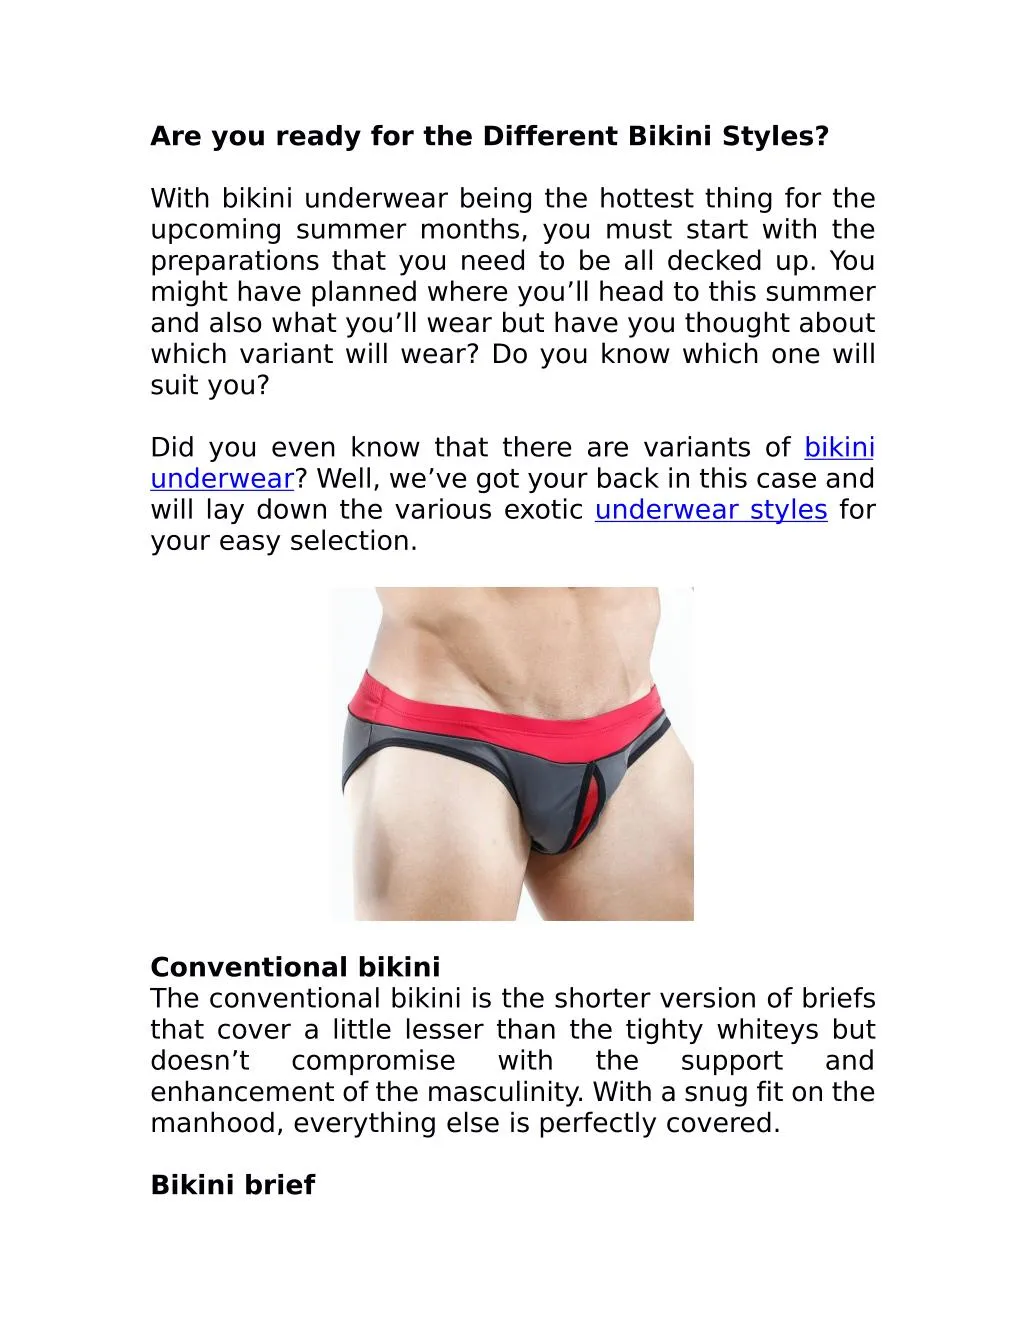 are you ready for the different bikini styles